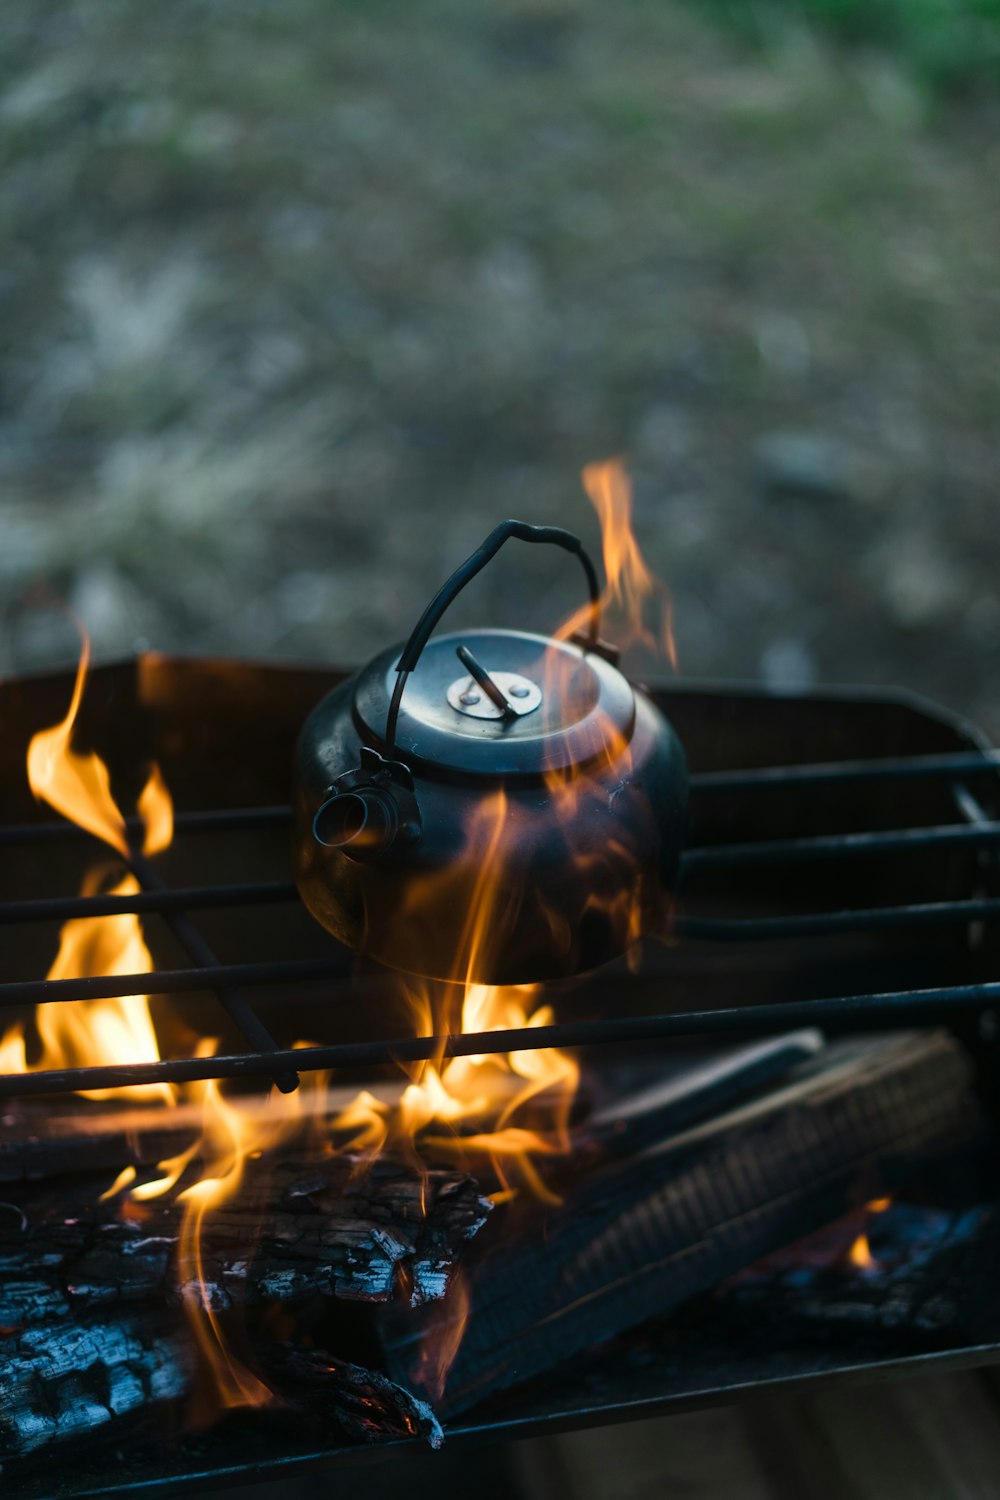 black and silver portable stove on fire